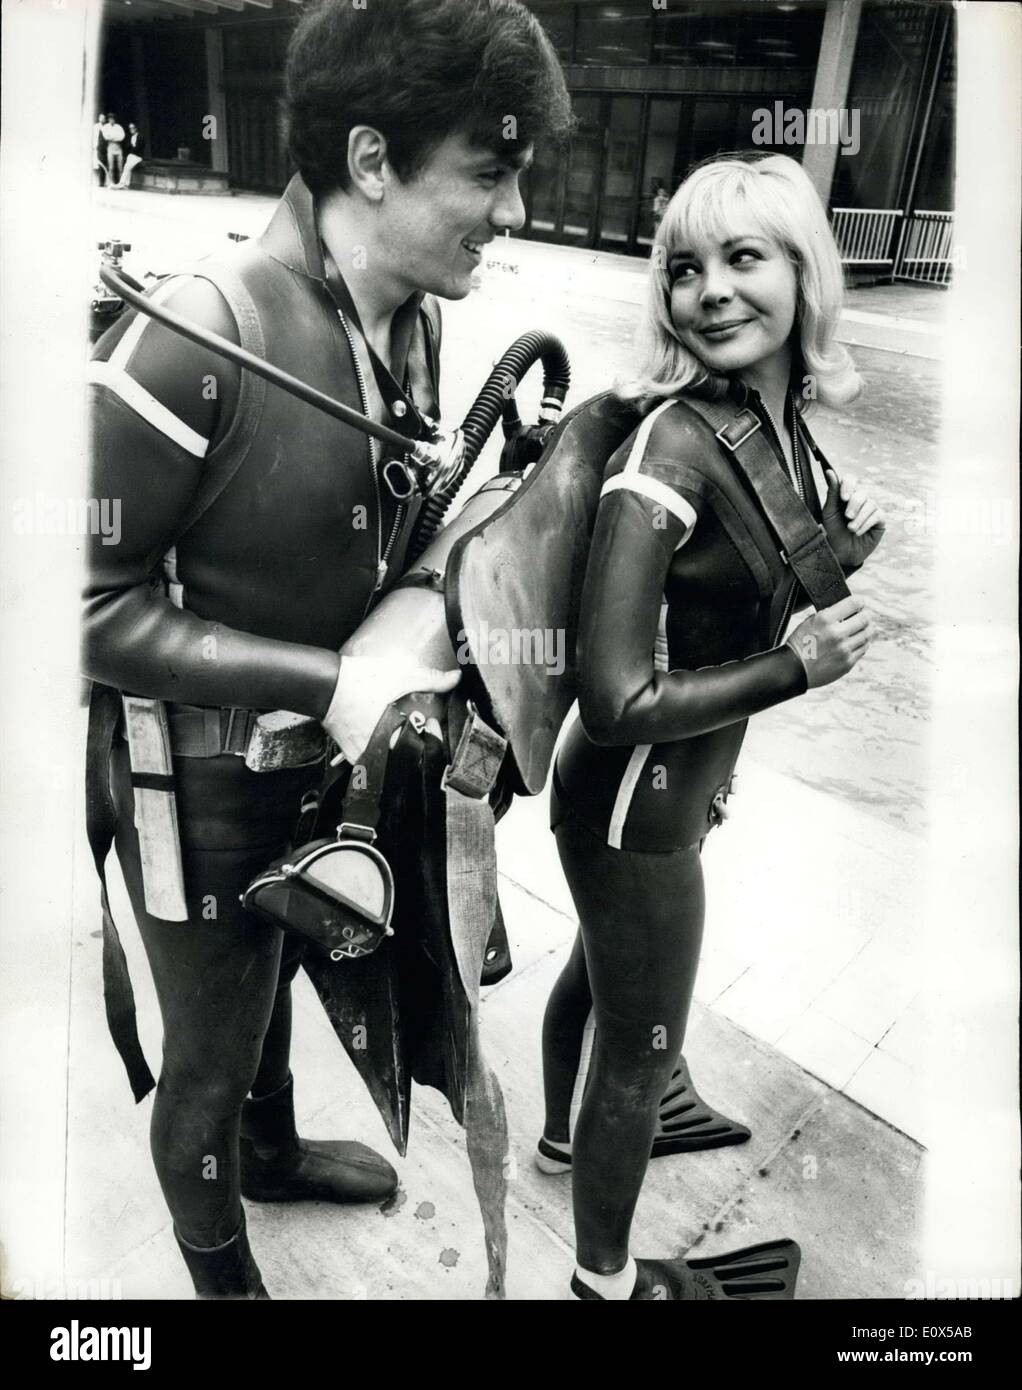 Apr. 15, 1965 - Pop Star Dave Clark Takes The Plunge As A Stunt Man: Dave Clark, the pop star, is just finishing making his first film ''Catch Us If You Can'' Dave wore a frogman's suit yesterday for underwater shots at London's Oasis swimming pool. The singing drummer has been having a rough time during the film making. For Dave plays the part of a stunt man. Photo shows Pop star Dave Clark helps his co-star Barbara Ferris with her air tanks during the filming of the underwater scenes at the Oasis pool yesterday. Stock Photo